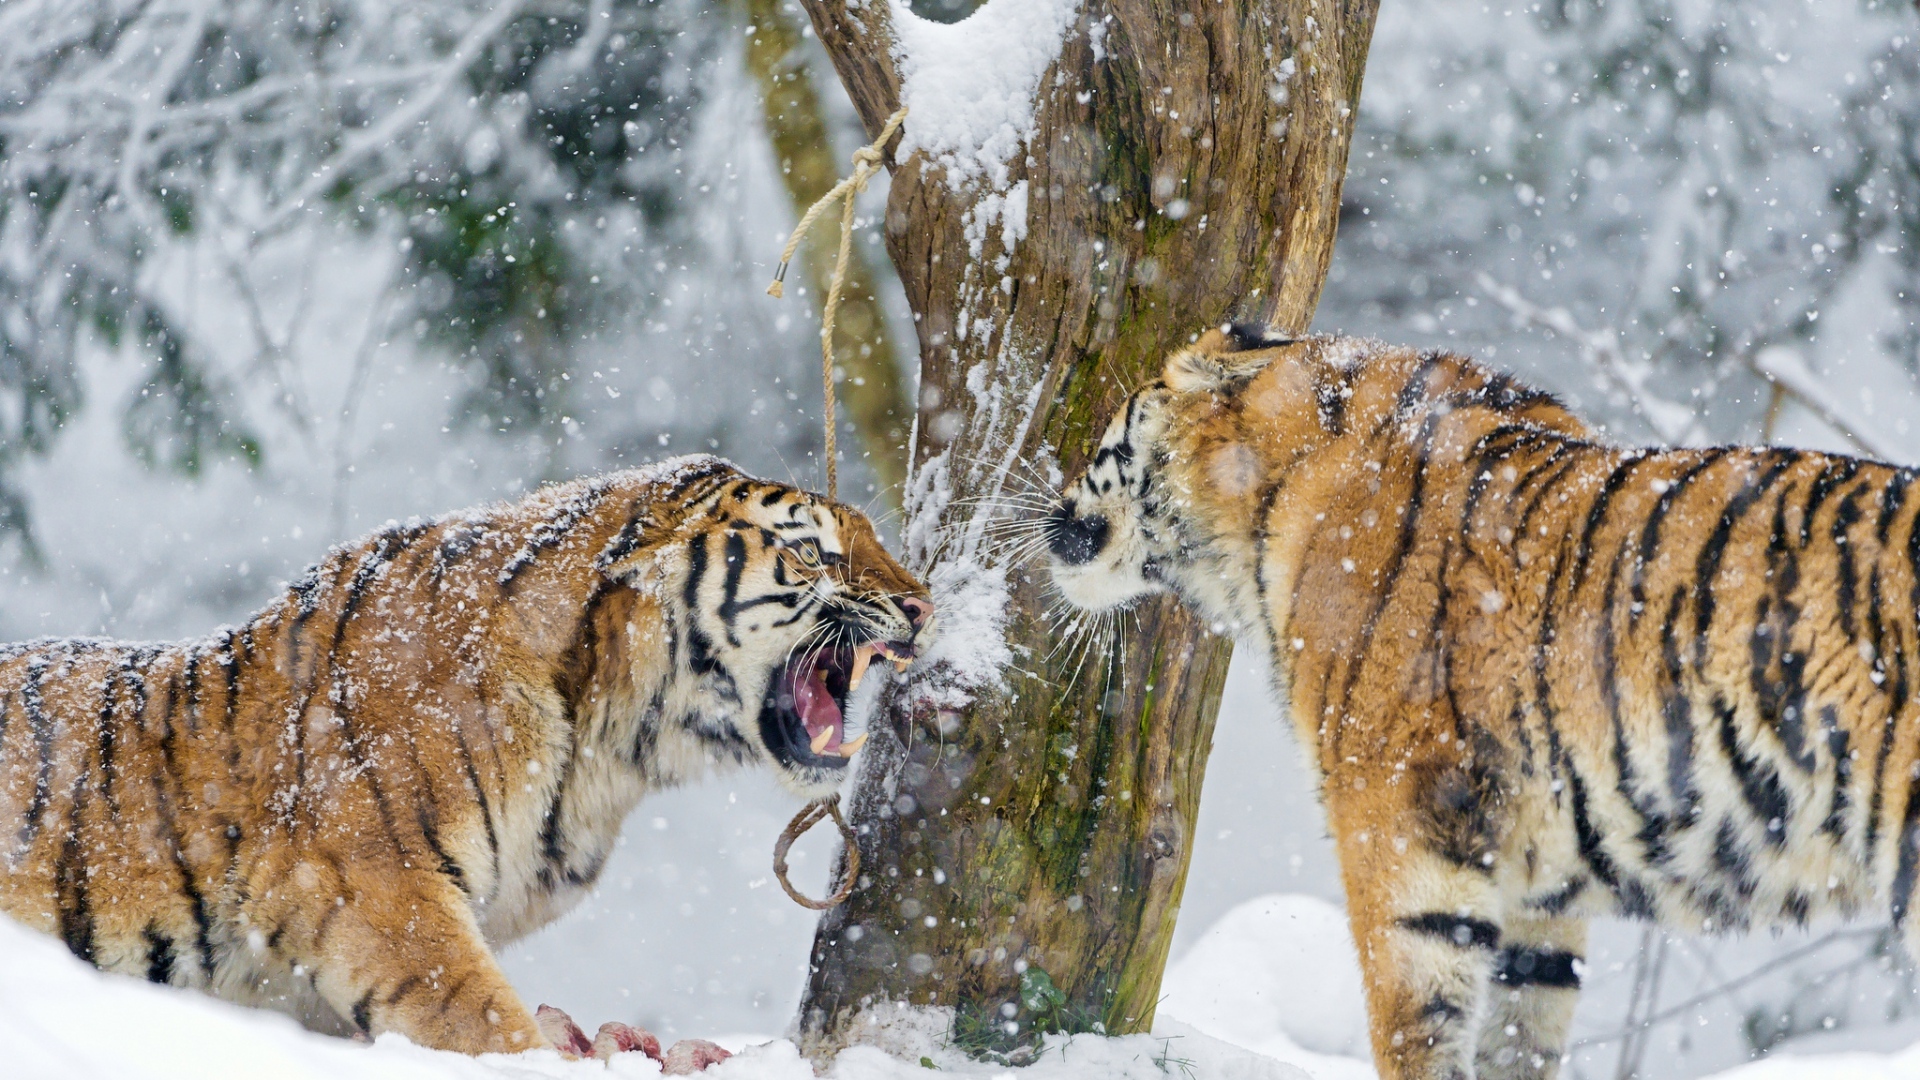 The Amur tiger (Photo from picsfab.com)